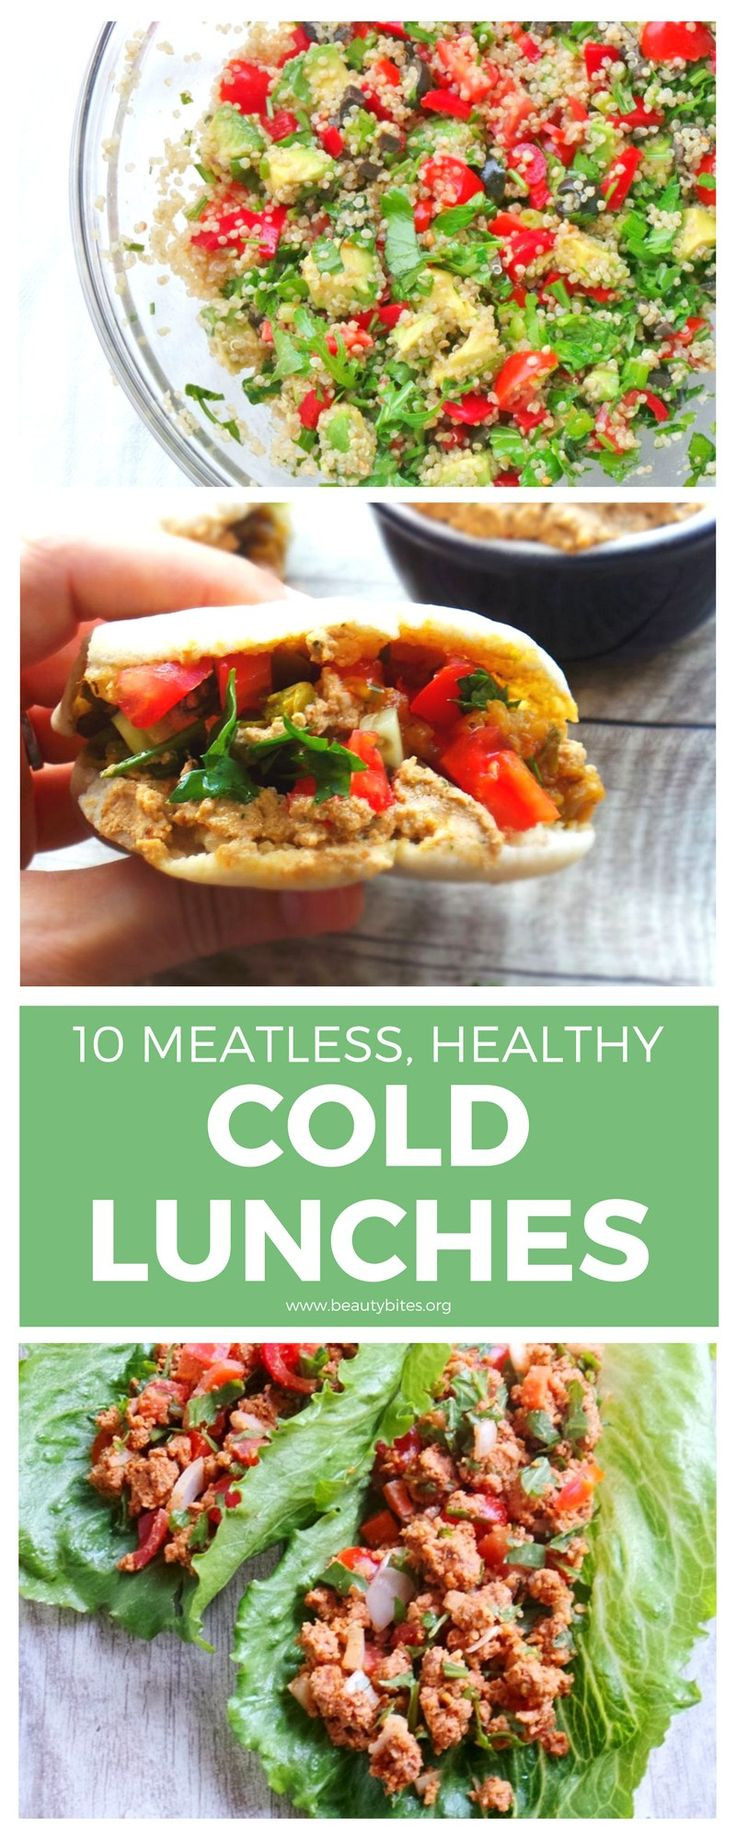 Healthy Cold Lunches
 Best 25 Cold lunches ideas on Pinterest